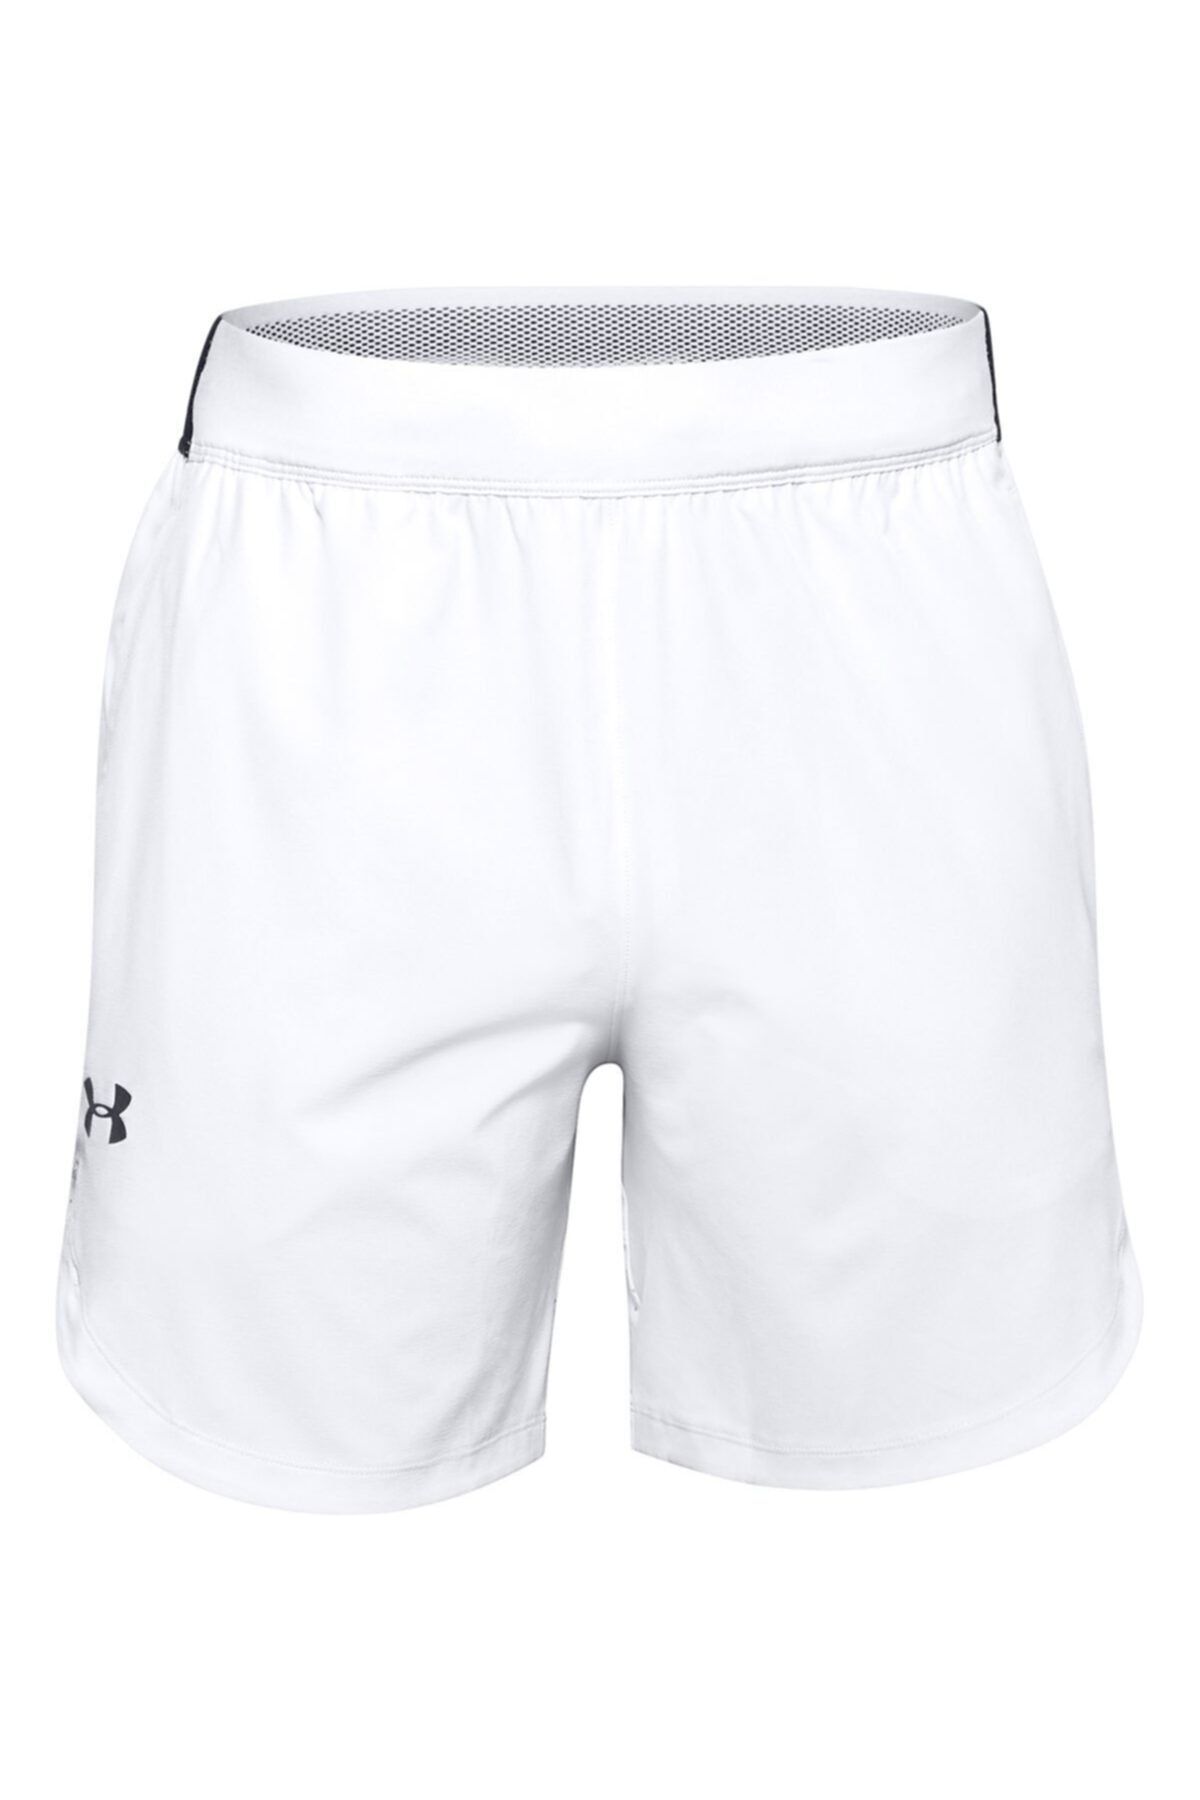 Under Armour Ua Stretch-woven Shorts 1351667-014